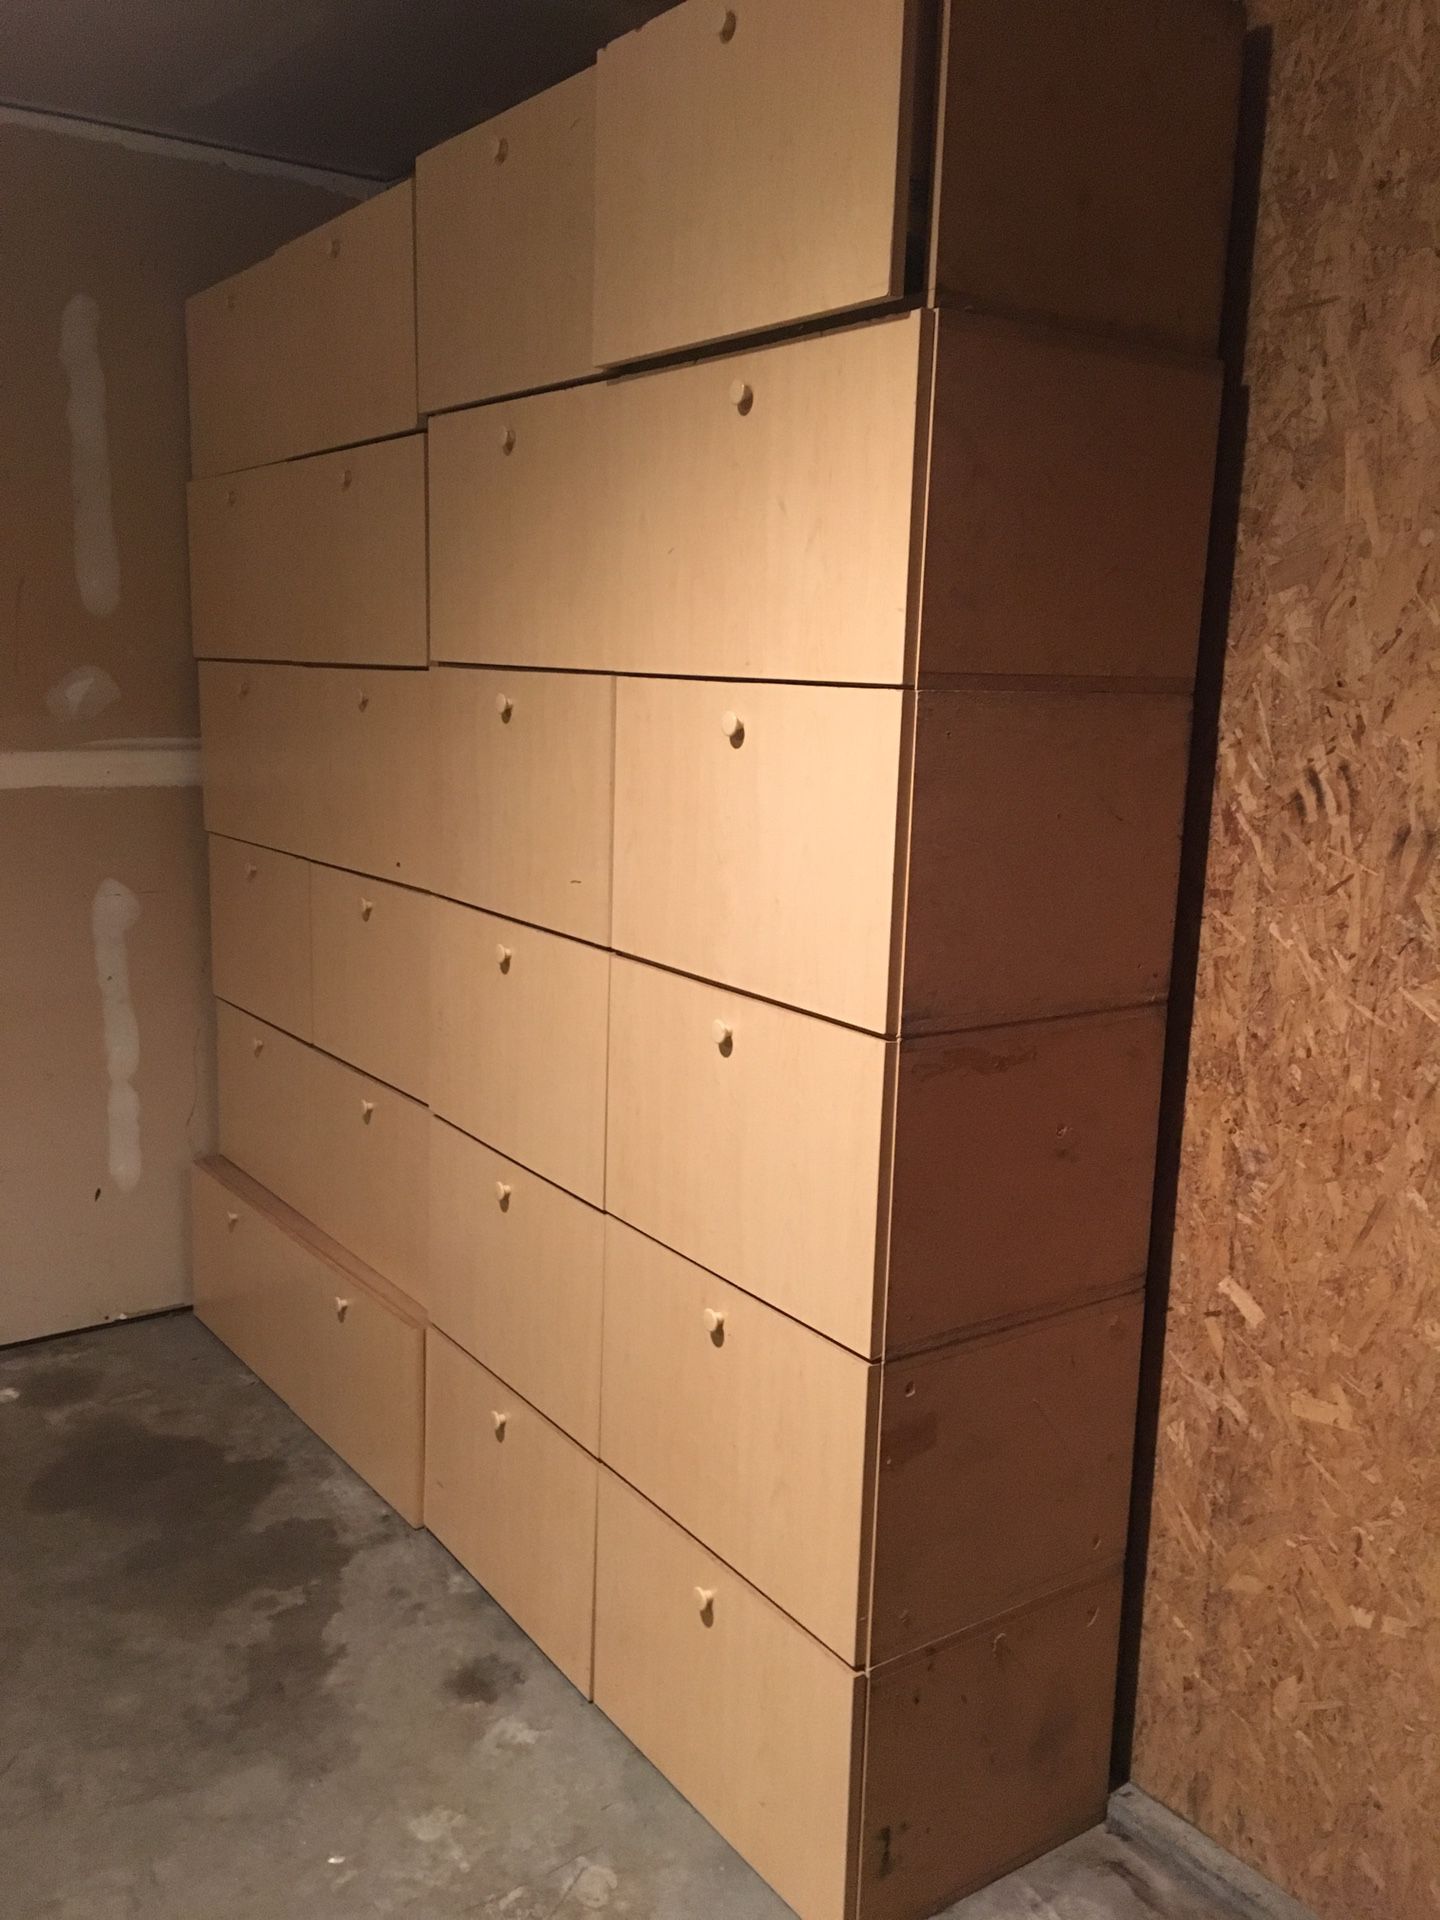 Heavy duty cabinets/drawers shelves